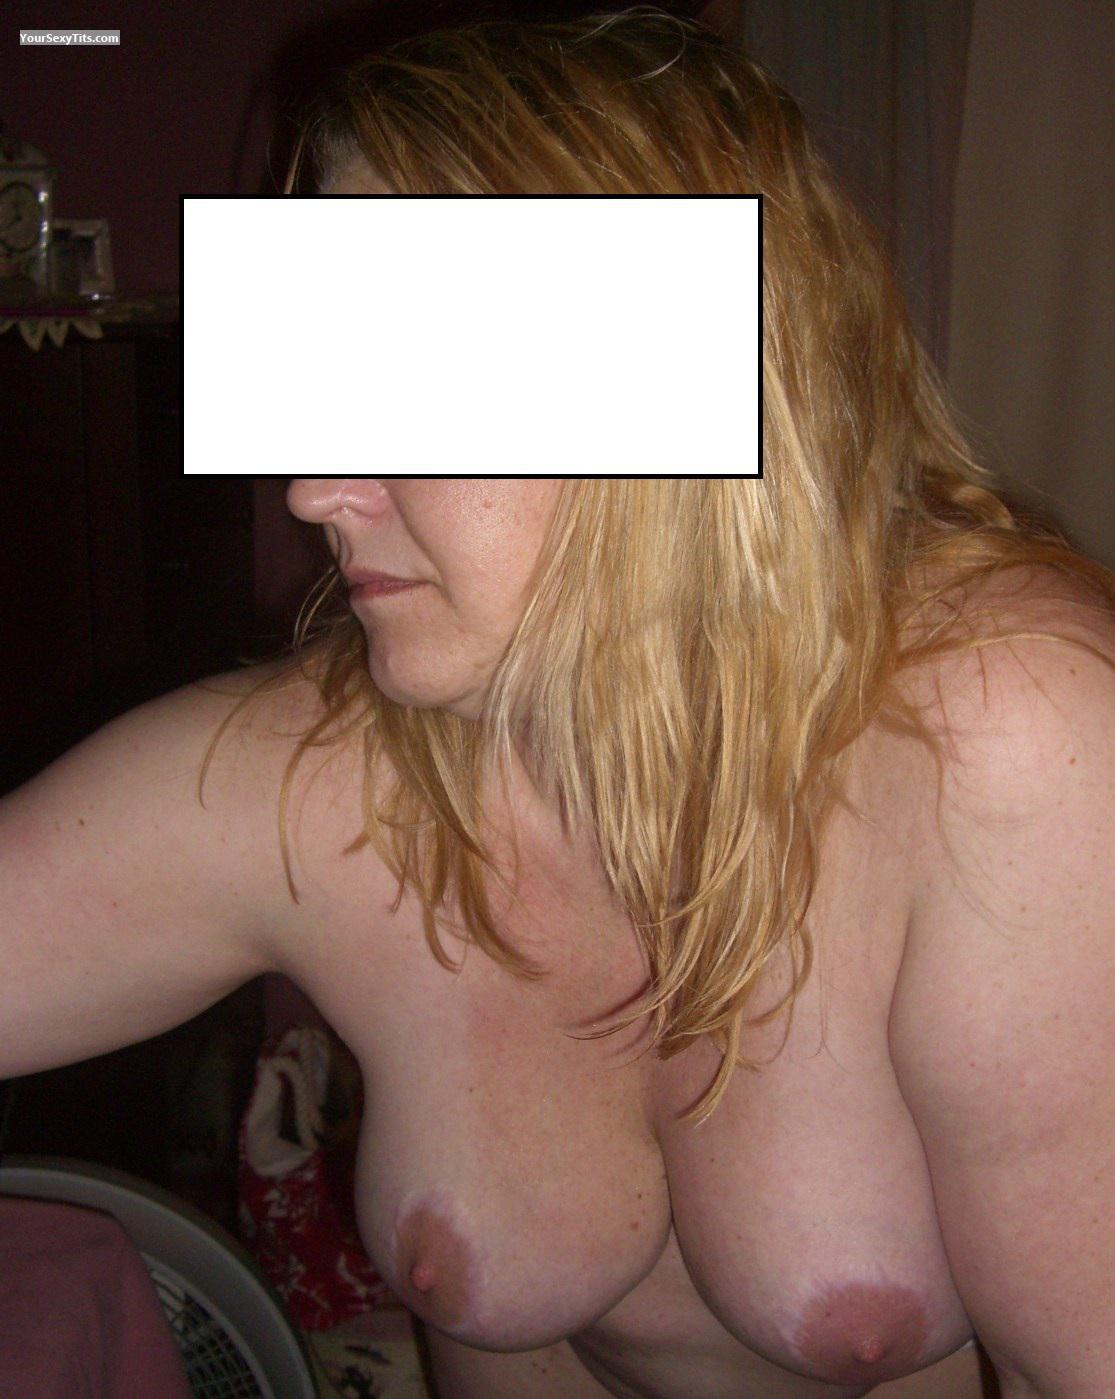 Tit Flash: My Very Big Tits - Getting Ready from United States